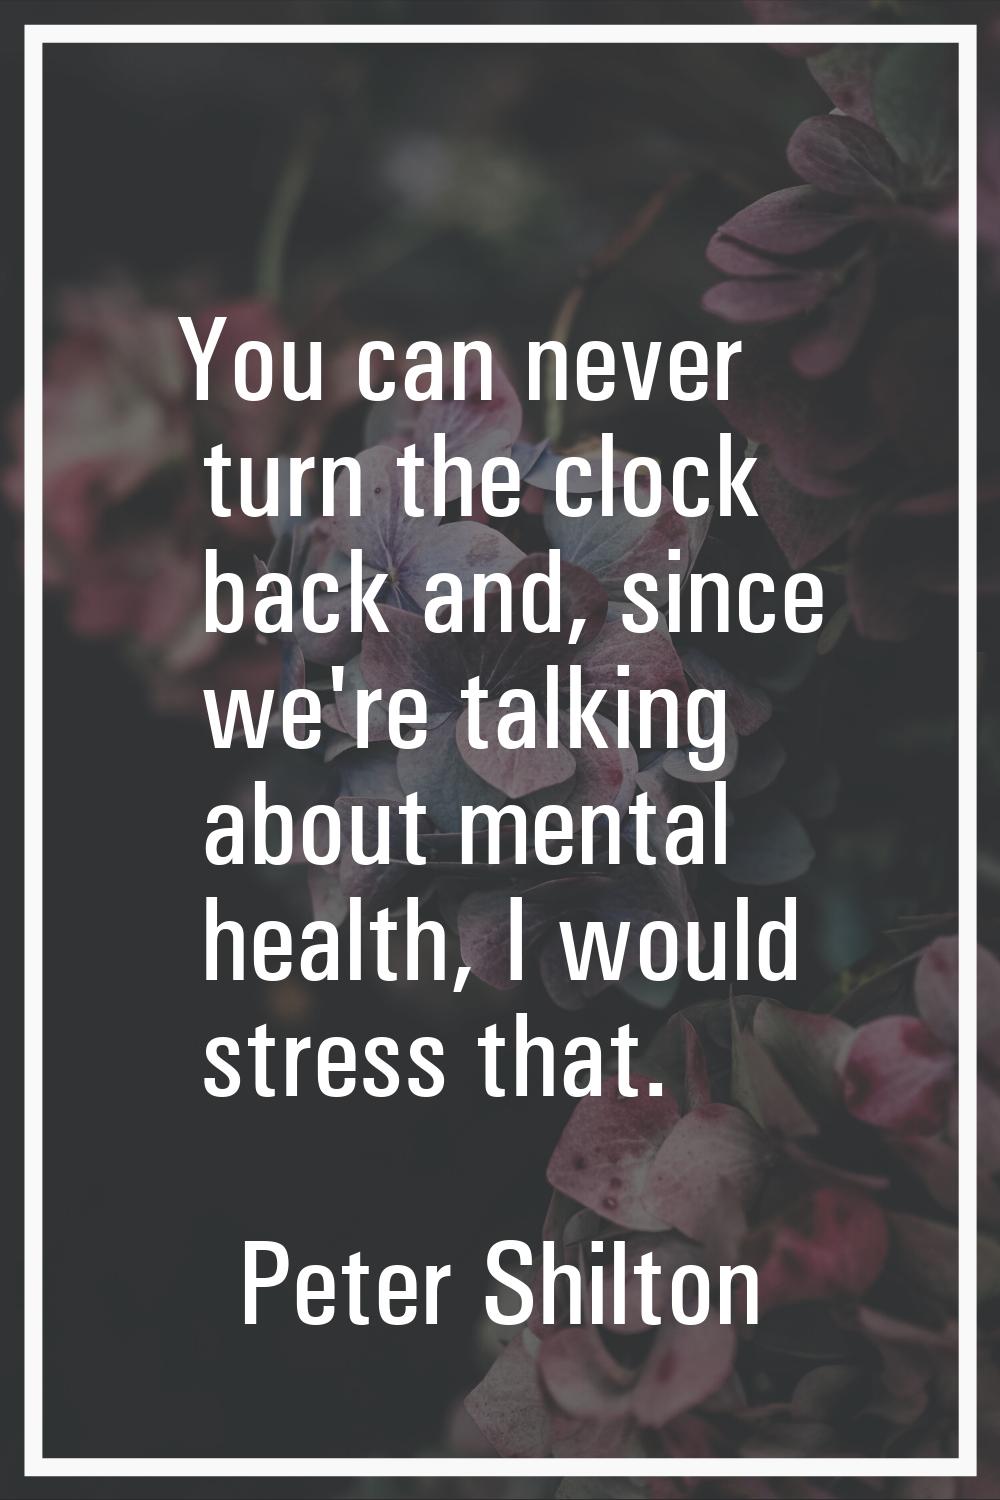 You can never turn the clock back and, since we're talking about mental health, I would stress that